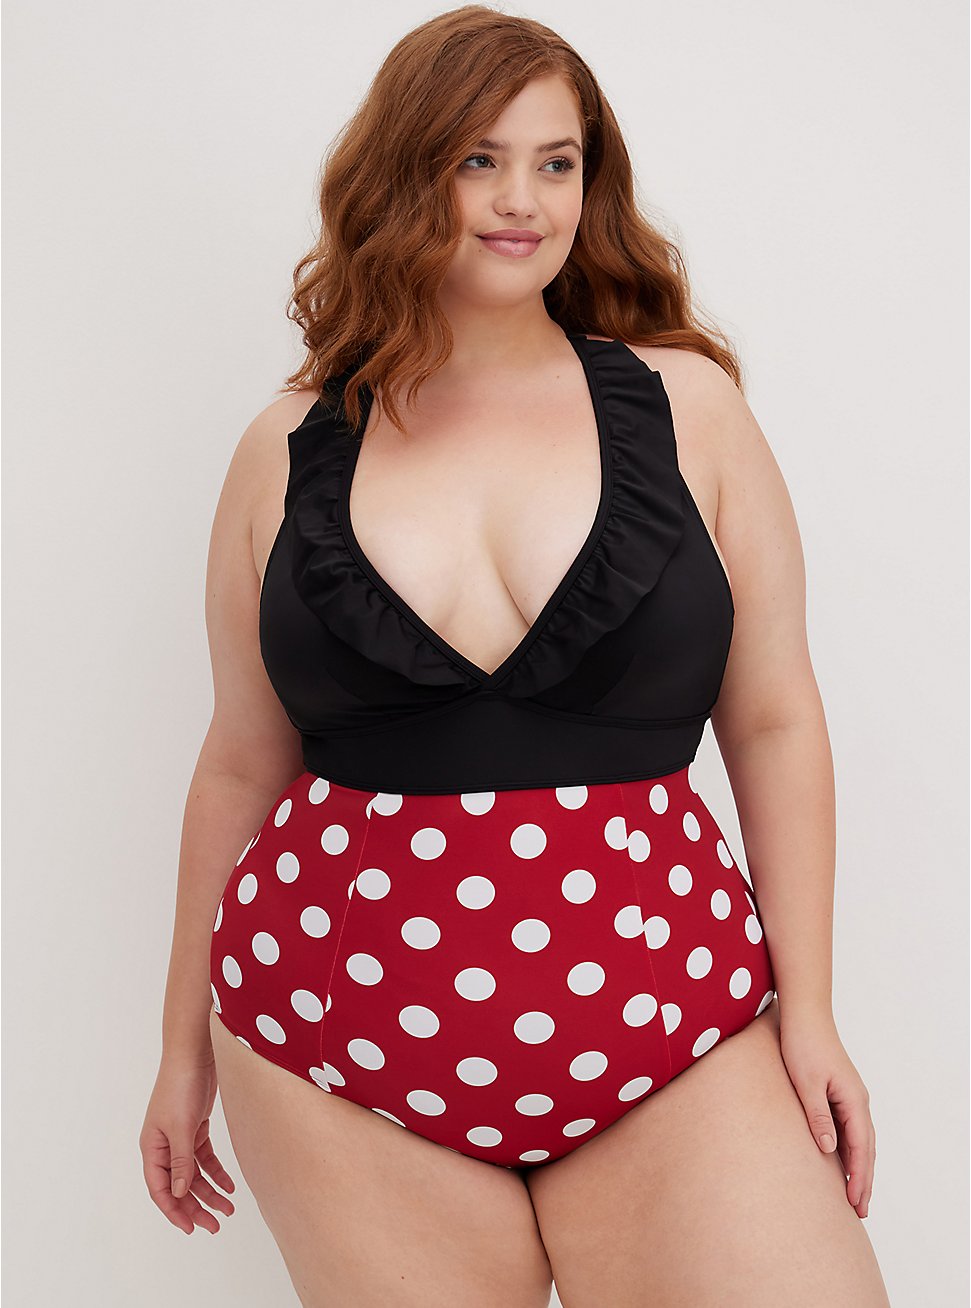 Ruffled One-Piece Swimsuit - Disney Minnie Mouse, MINNIE MOUSE DOT, hi-res